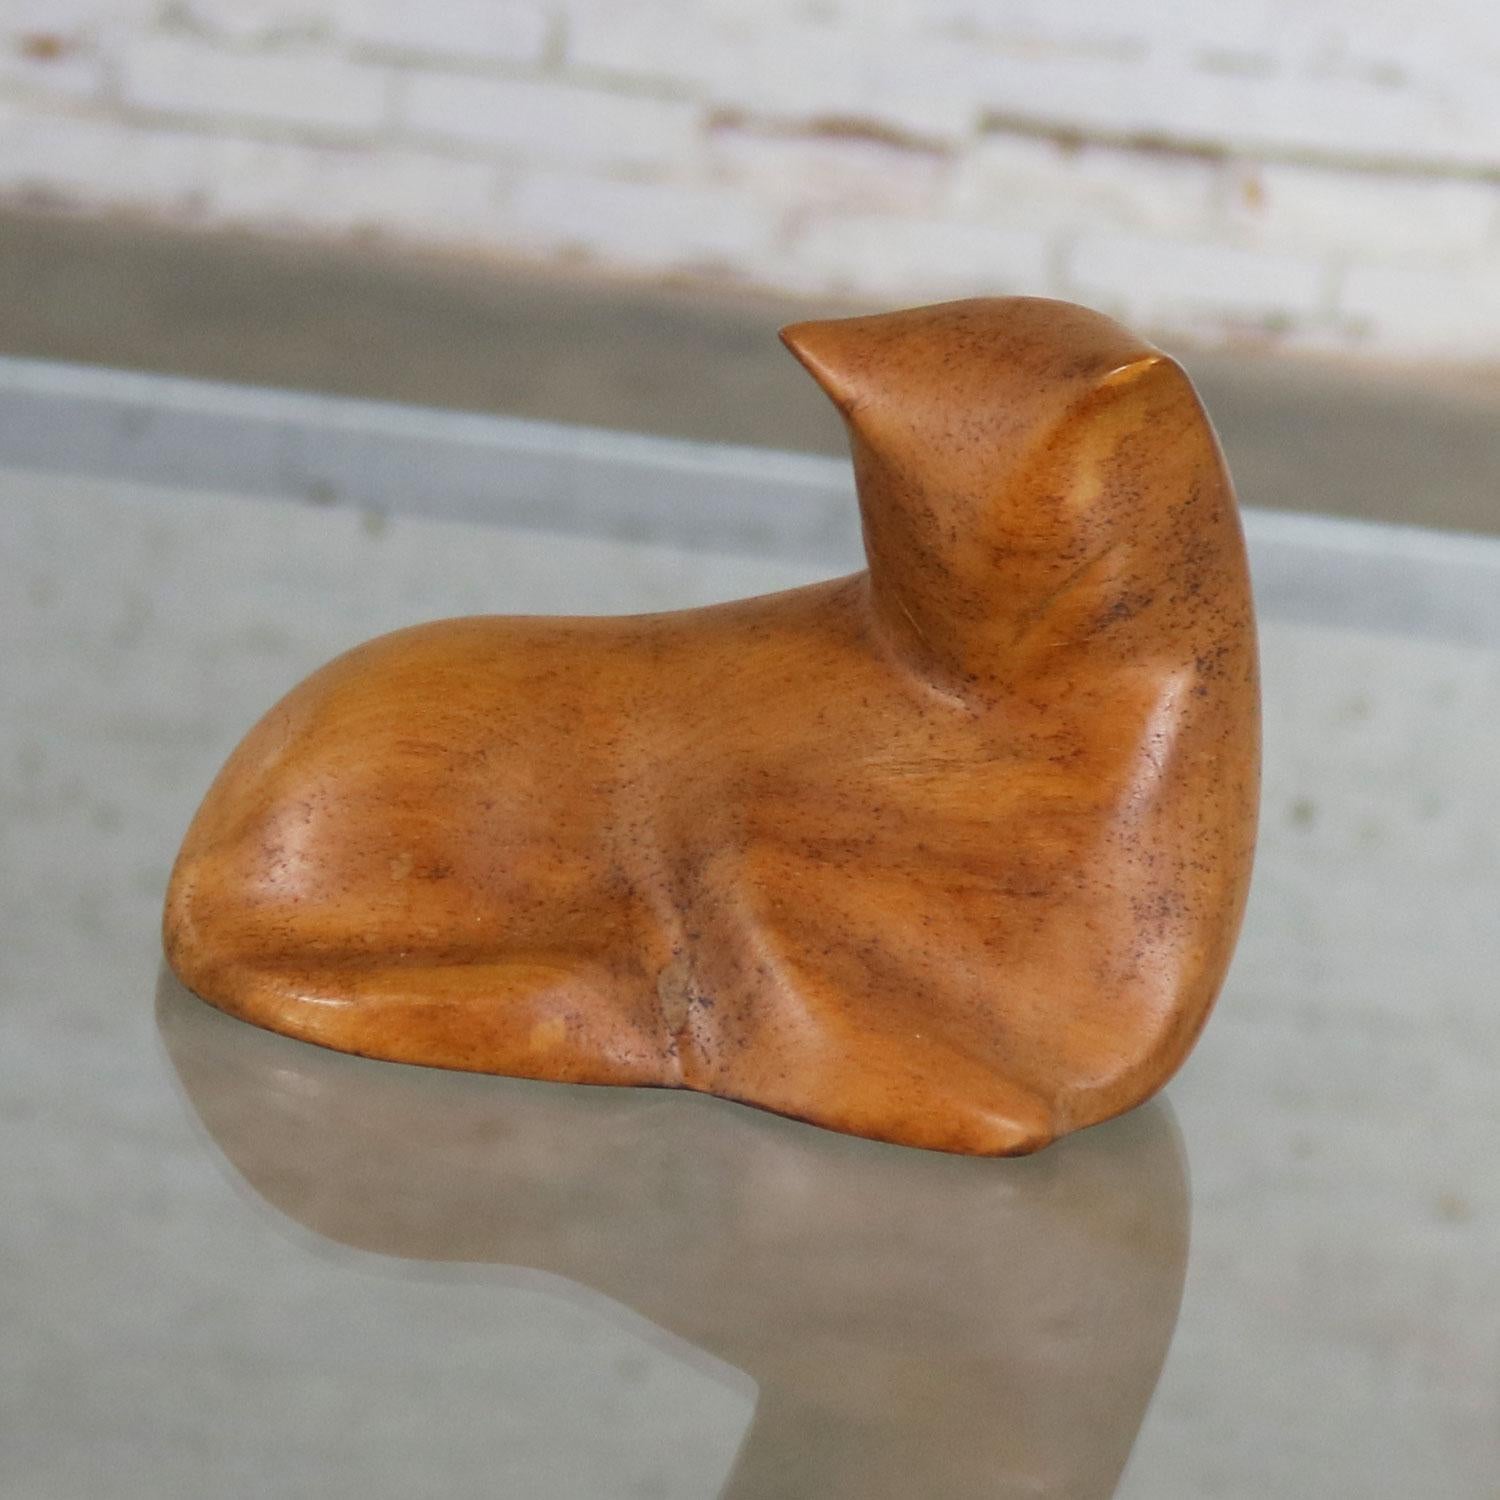 Handsome hand carved wood Mid-Century Modern cat sculpture. It is signed Luman Kelsey and in fabulous vintage condition, circa 1930s-1960s.

This beautiful cat sculpture is incredible. Hand carved and signed by Luman Kelsey. We believe this to be